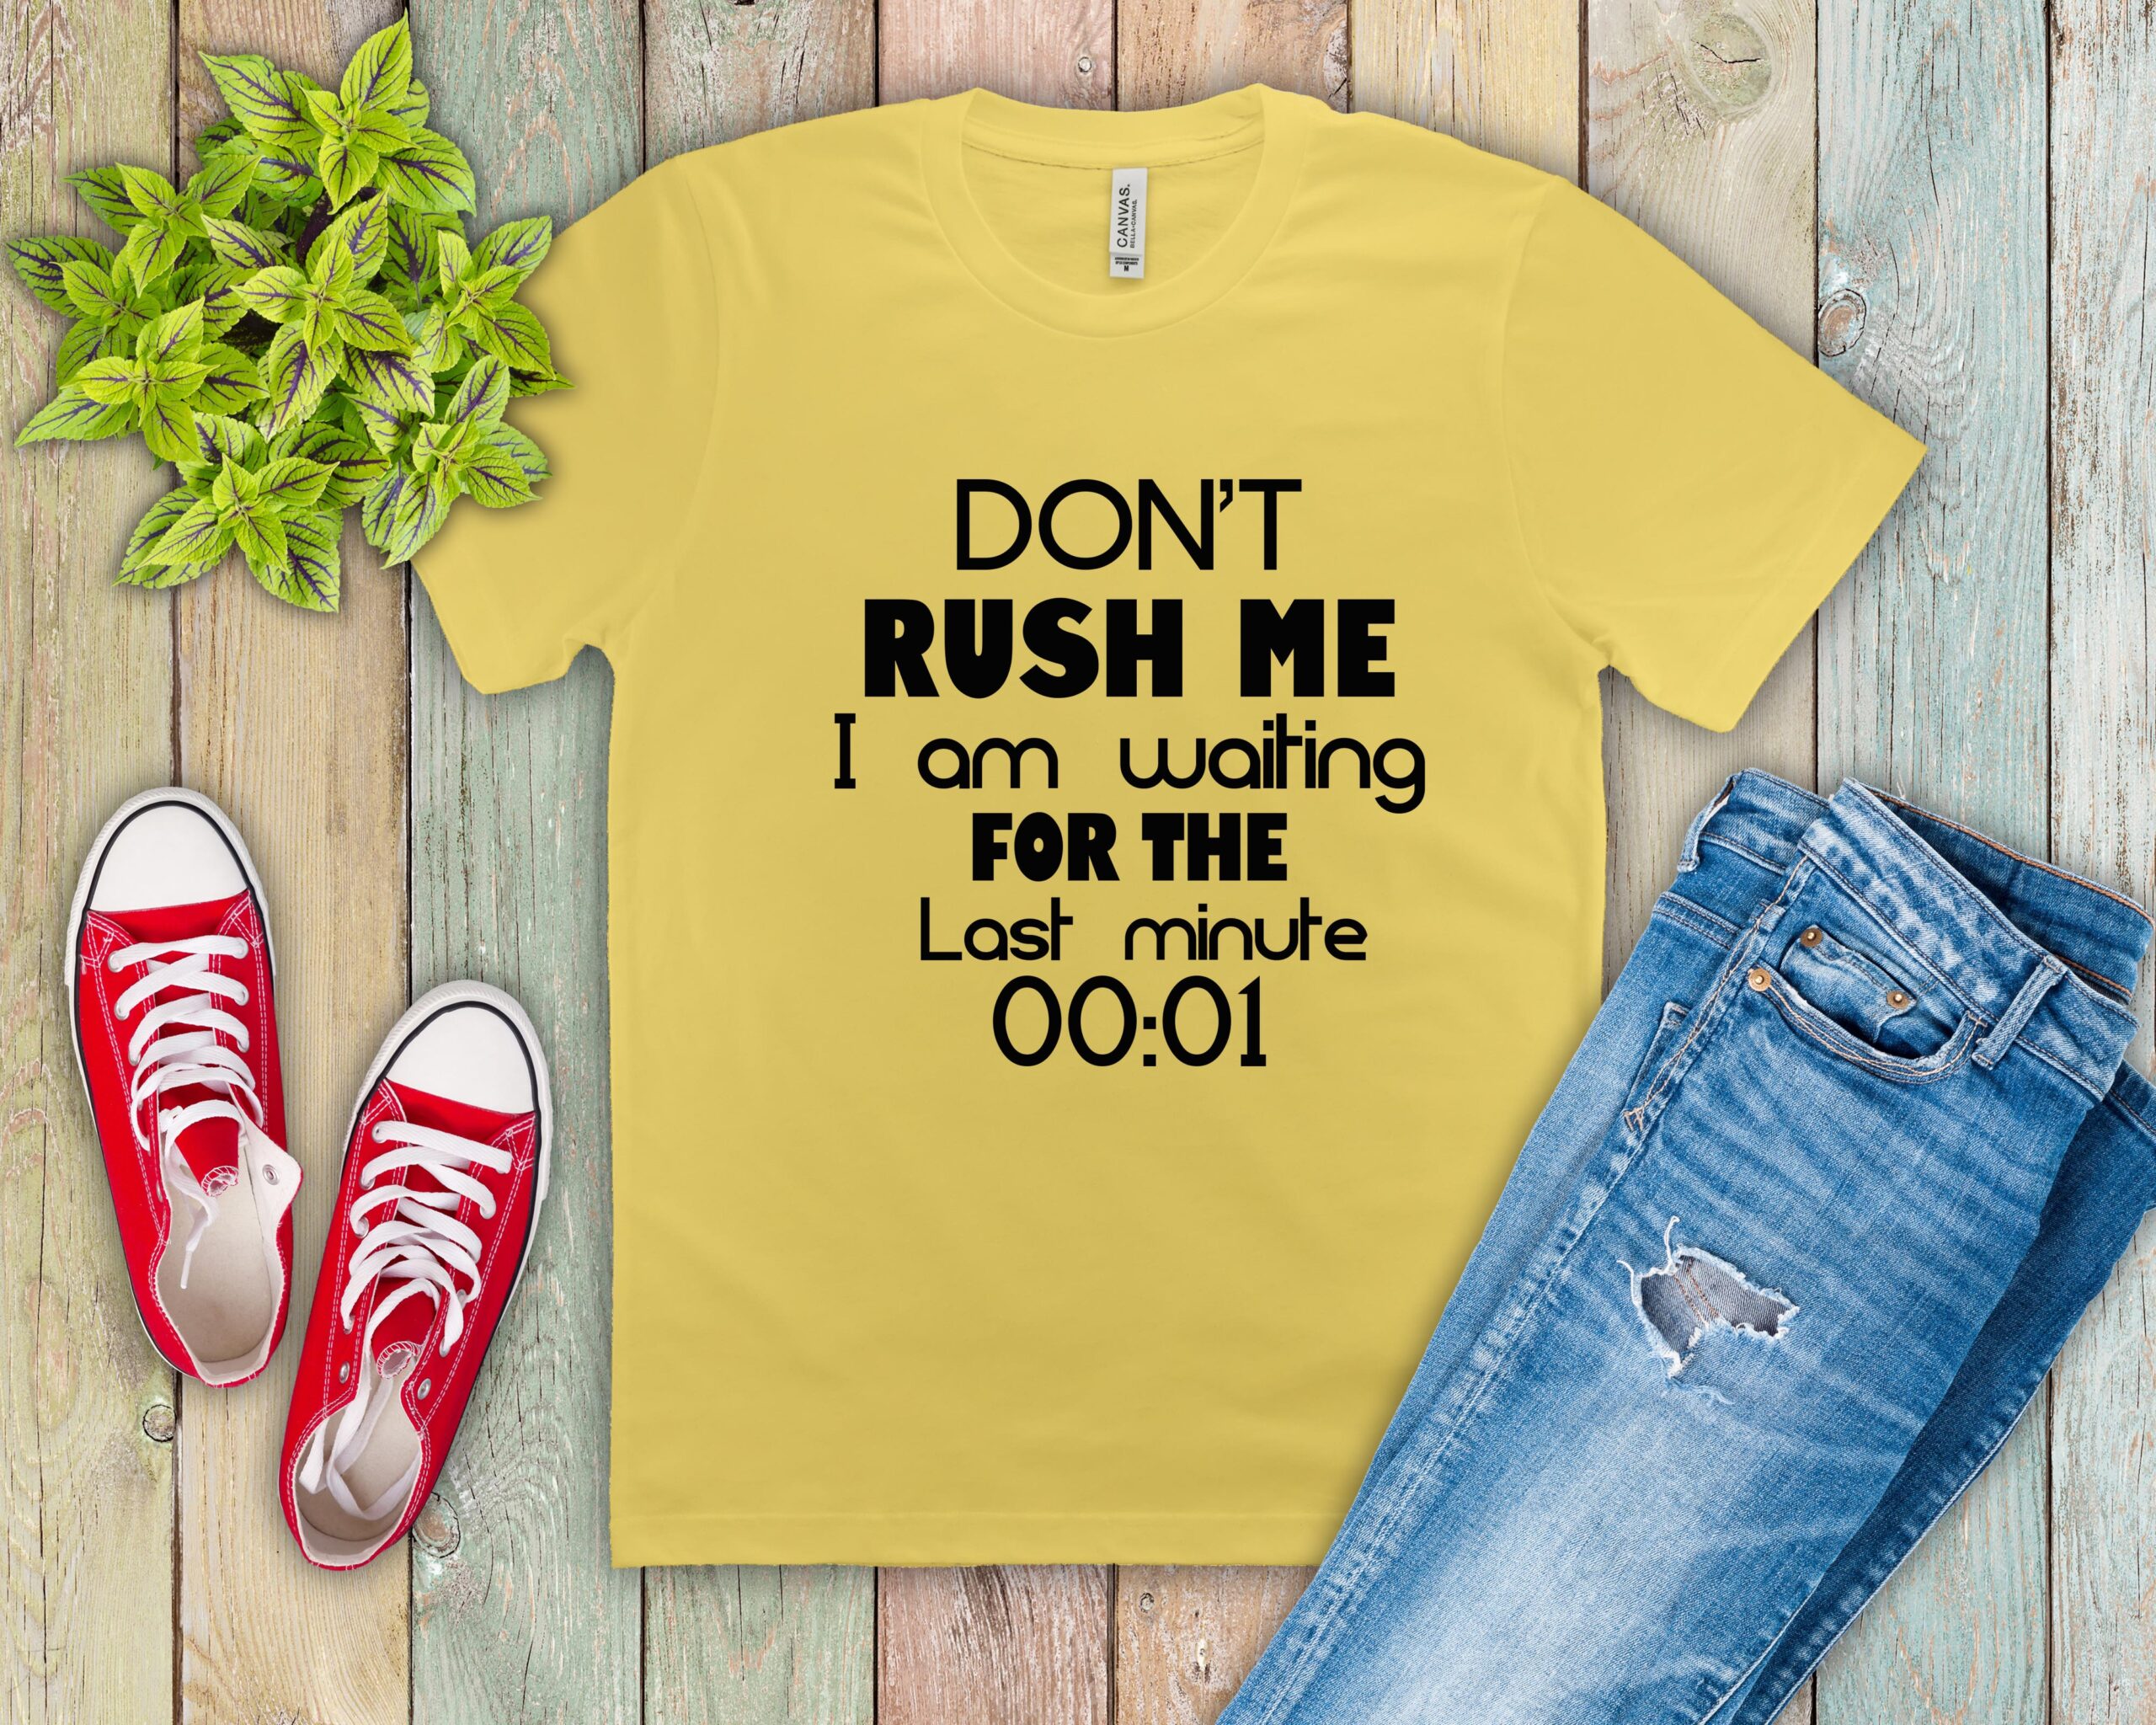 Free Don't Rush Me SVG Cutting File for the Cricut.